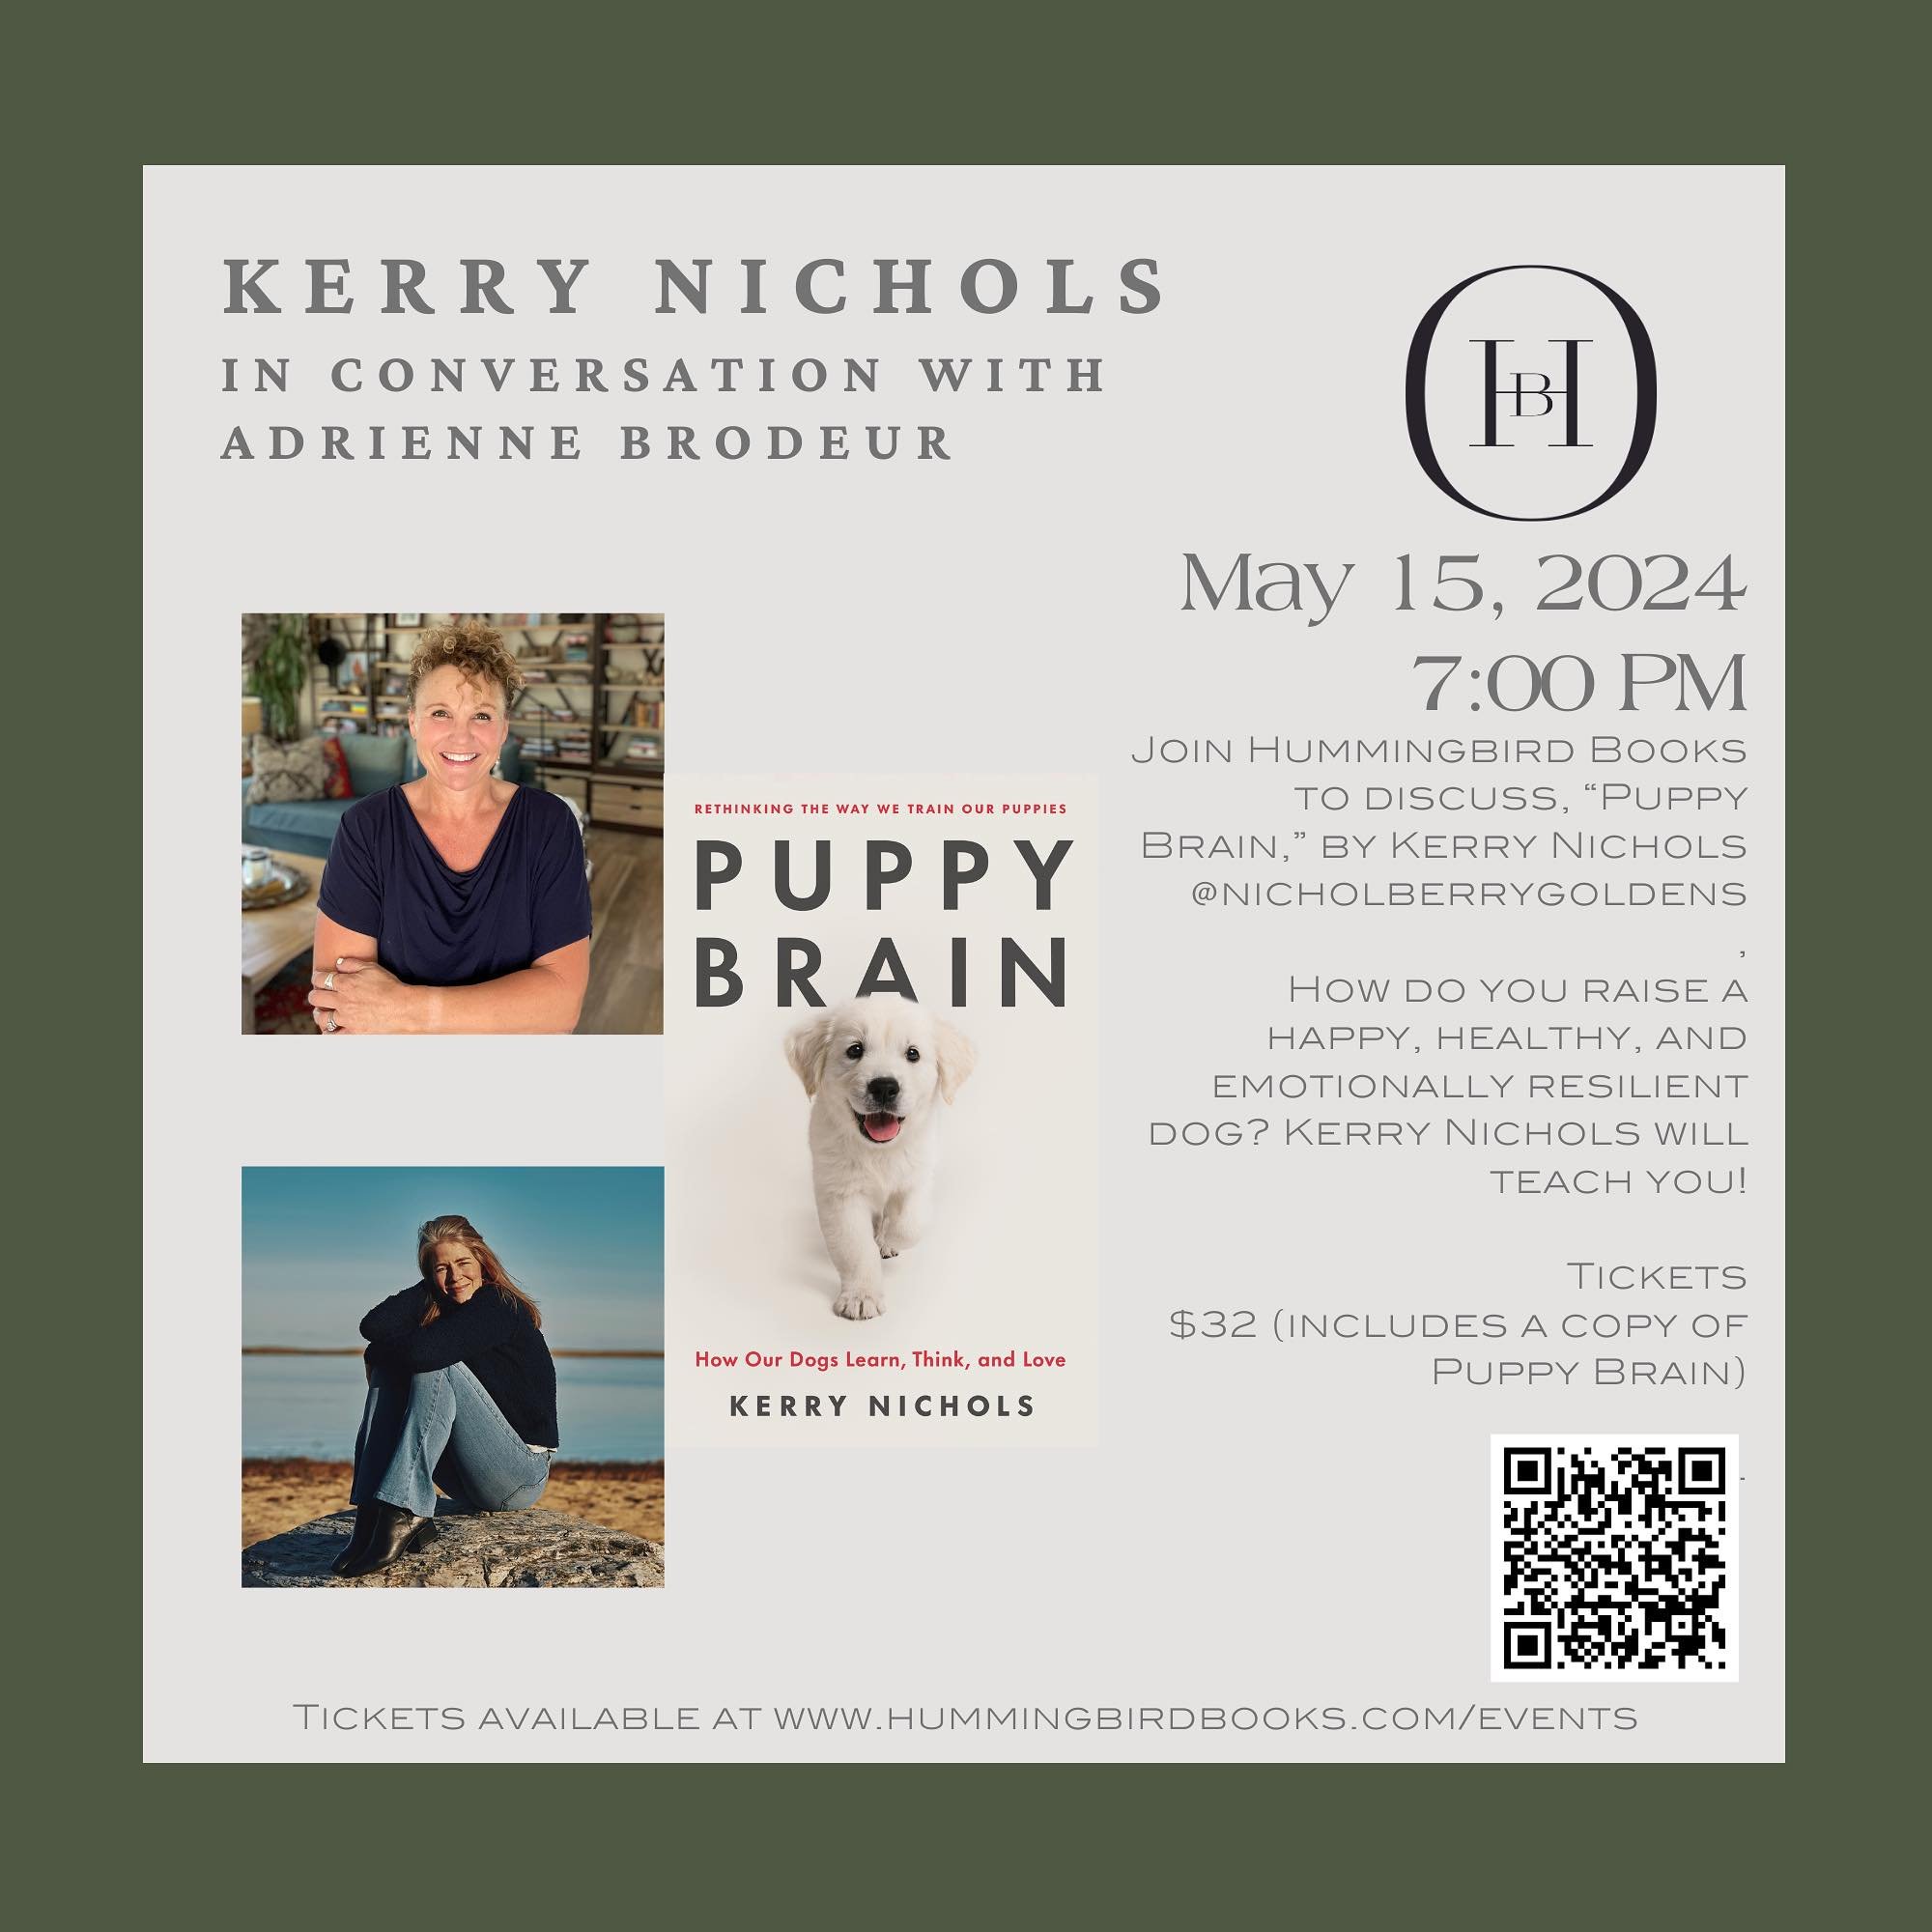 We are so excited to welcome @nicholberrygoldens and @adriennebrodeur to discuss Kerry&rsquo;s new book, &ldquo;Puppy Brain: How Our Dogs Learn, Think, and Love.&rdquo; Join us to learn more about how to raise a happy and healthy pup! 🐾🦴🐶❤️

Ticke